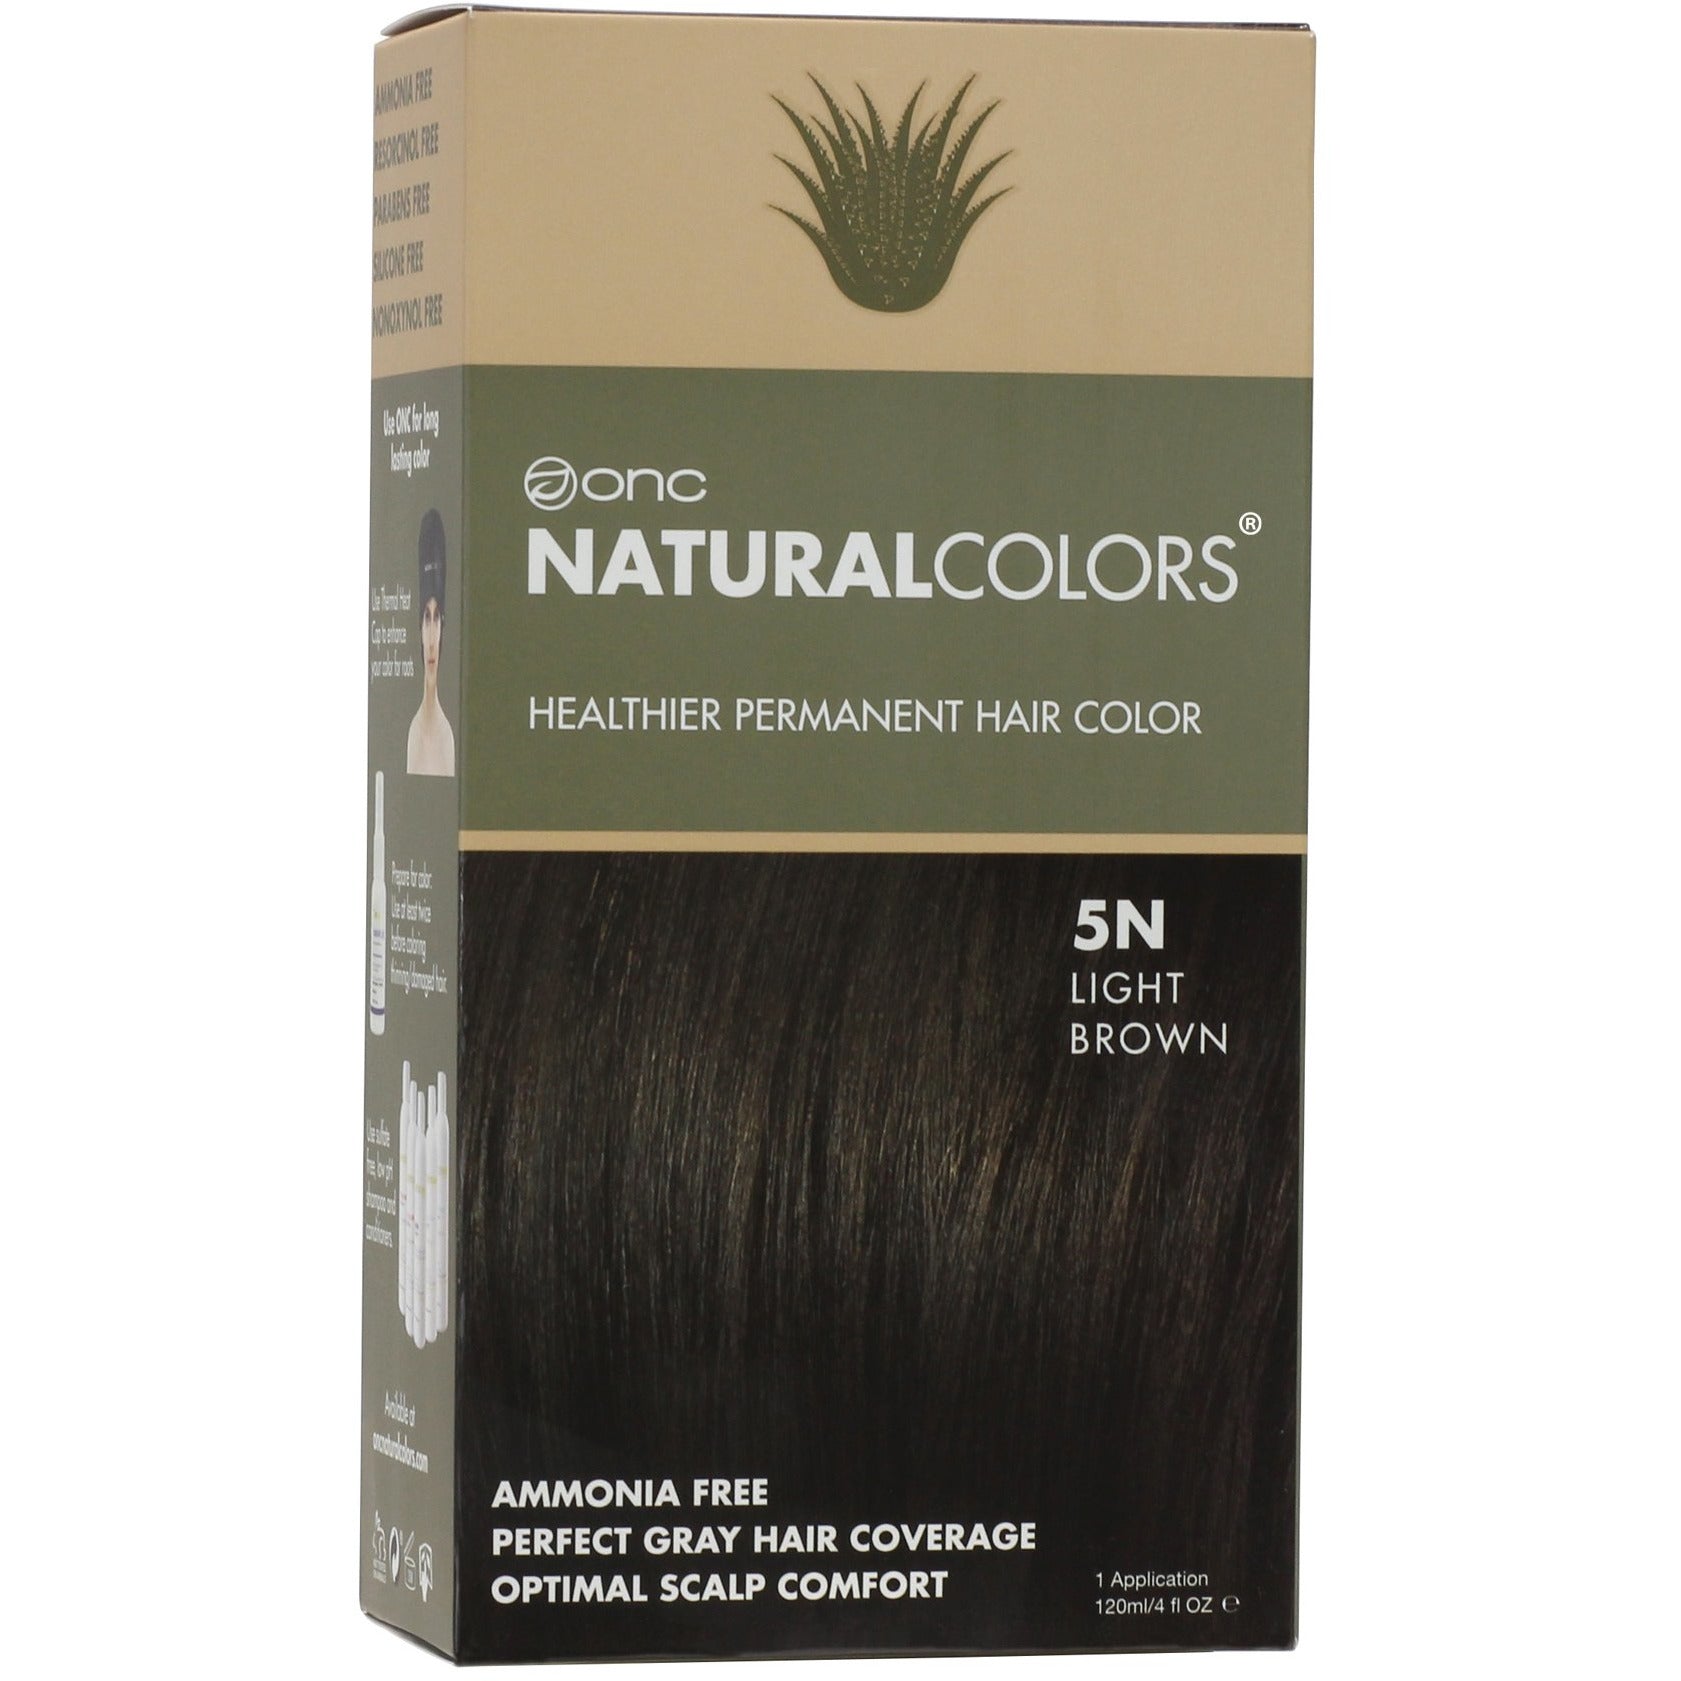 5N Natural Light Brown Heat Activated Hair Dye With Organic Ingredients - 120 ml (4 fl. oz)